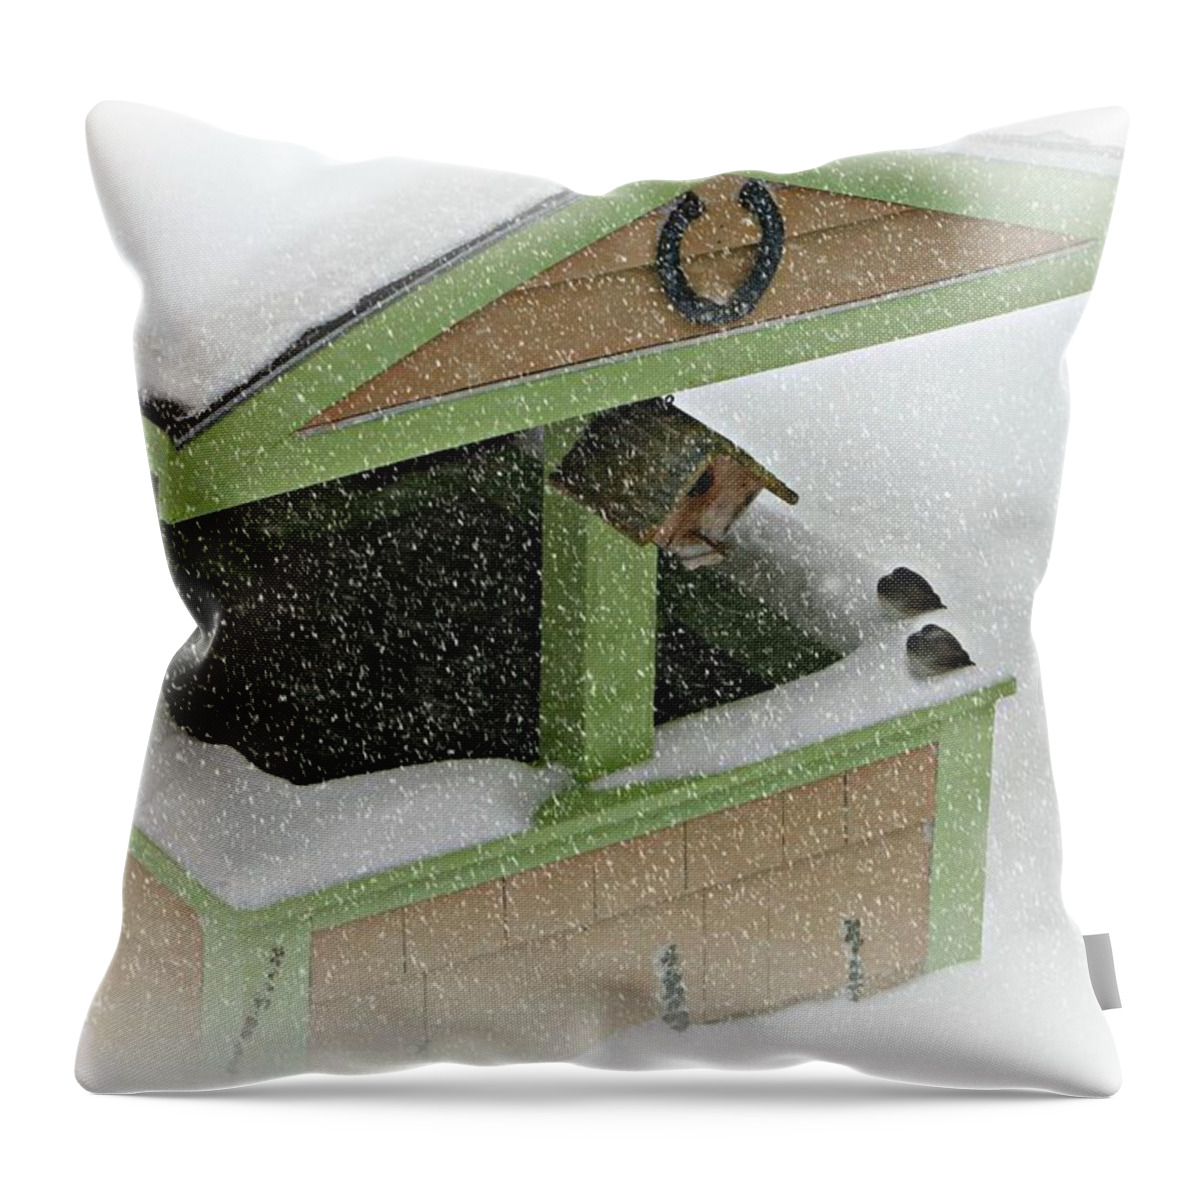 Blizzard Throw Pillow featuring the photograph New England Blizzard 2015 by Barbara S Nickerson